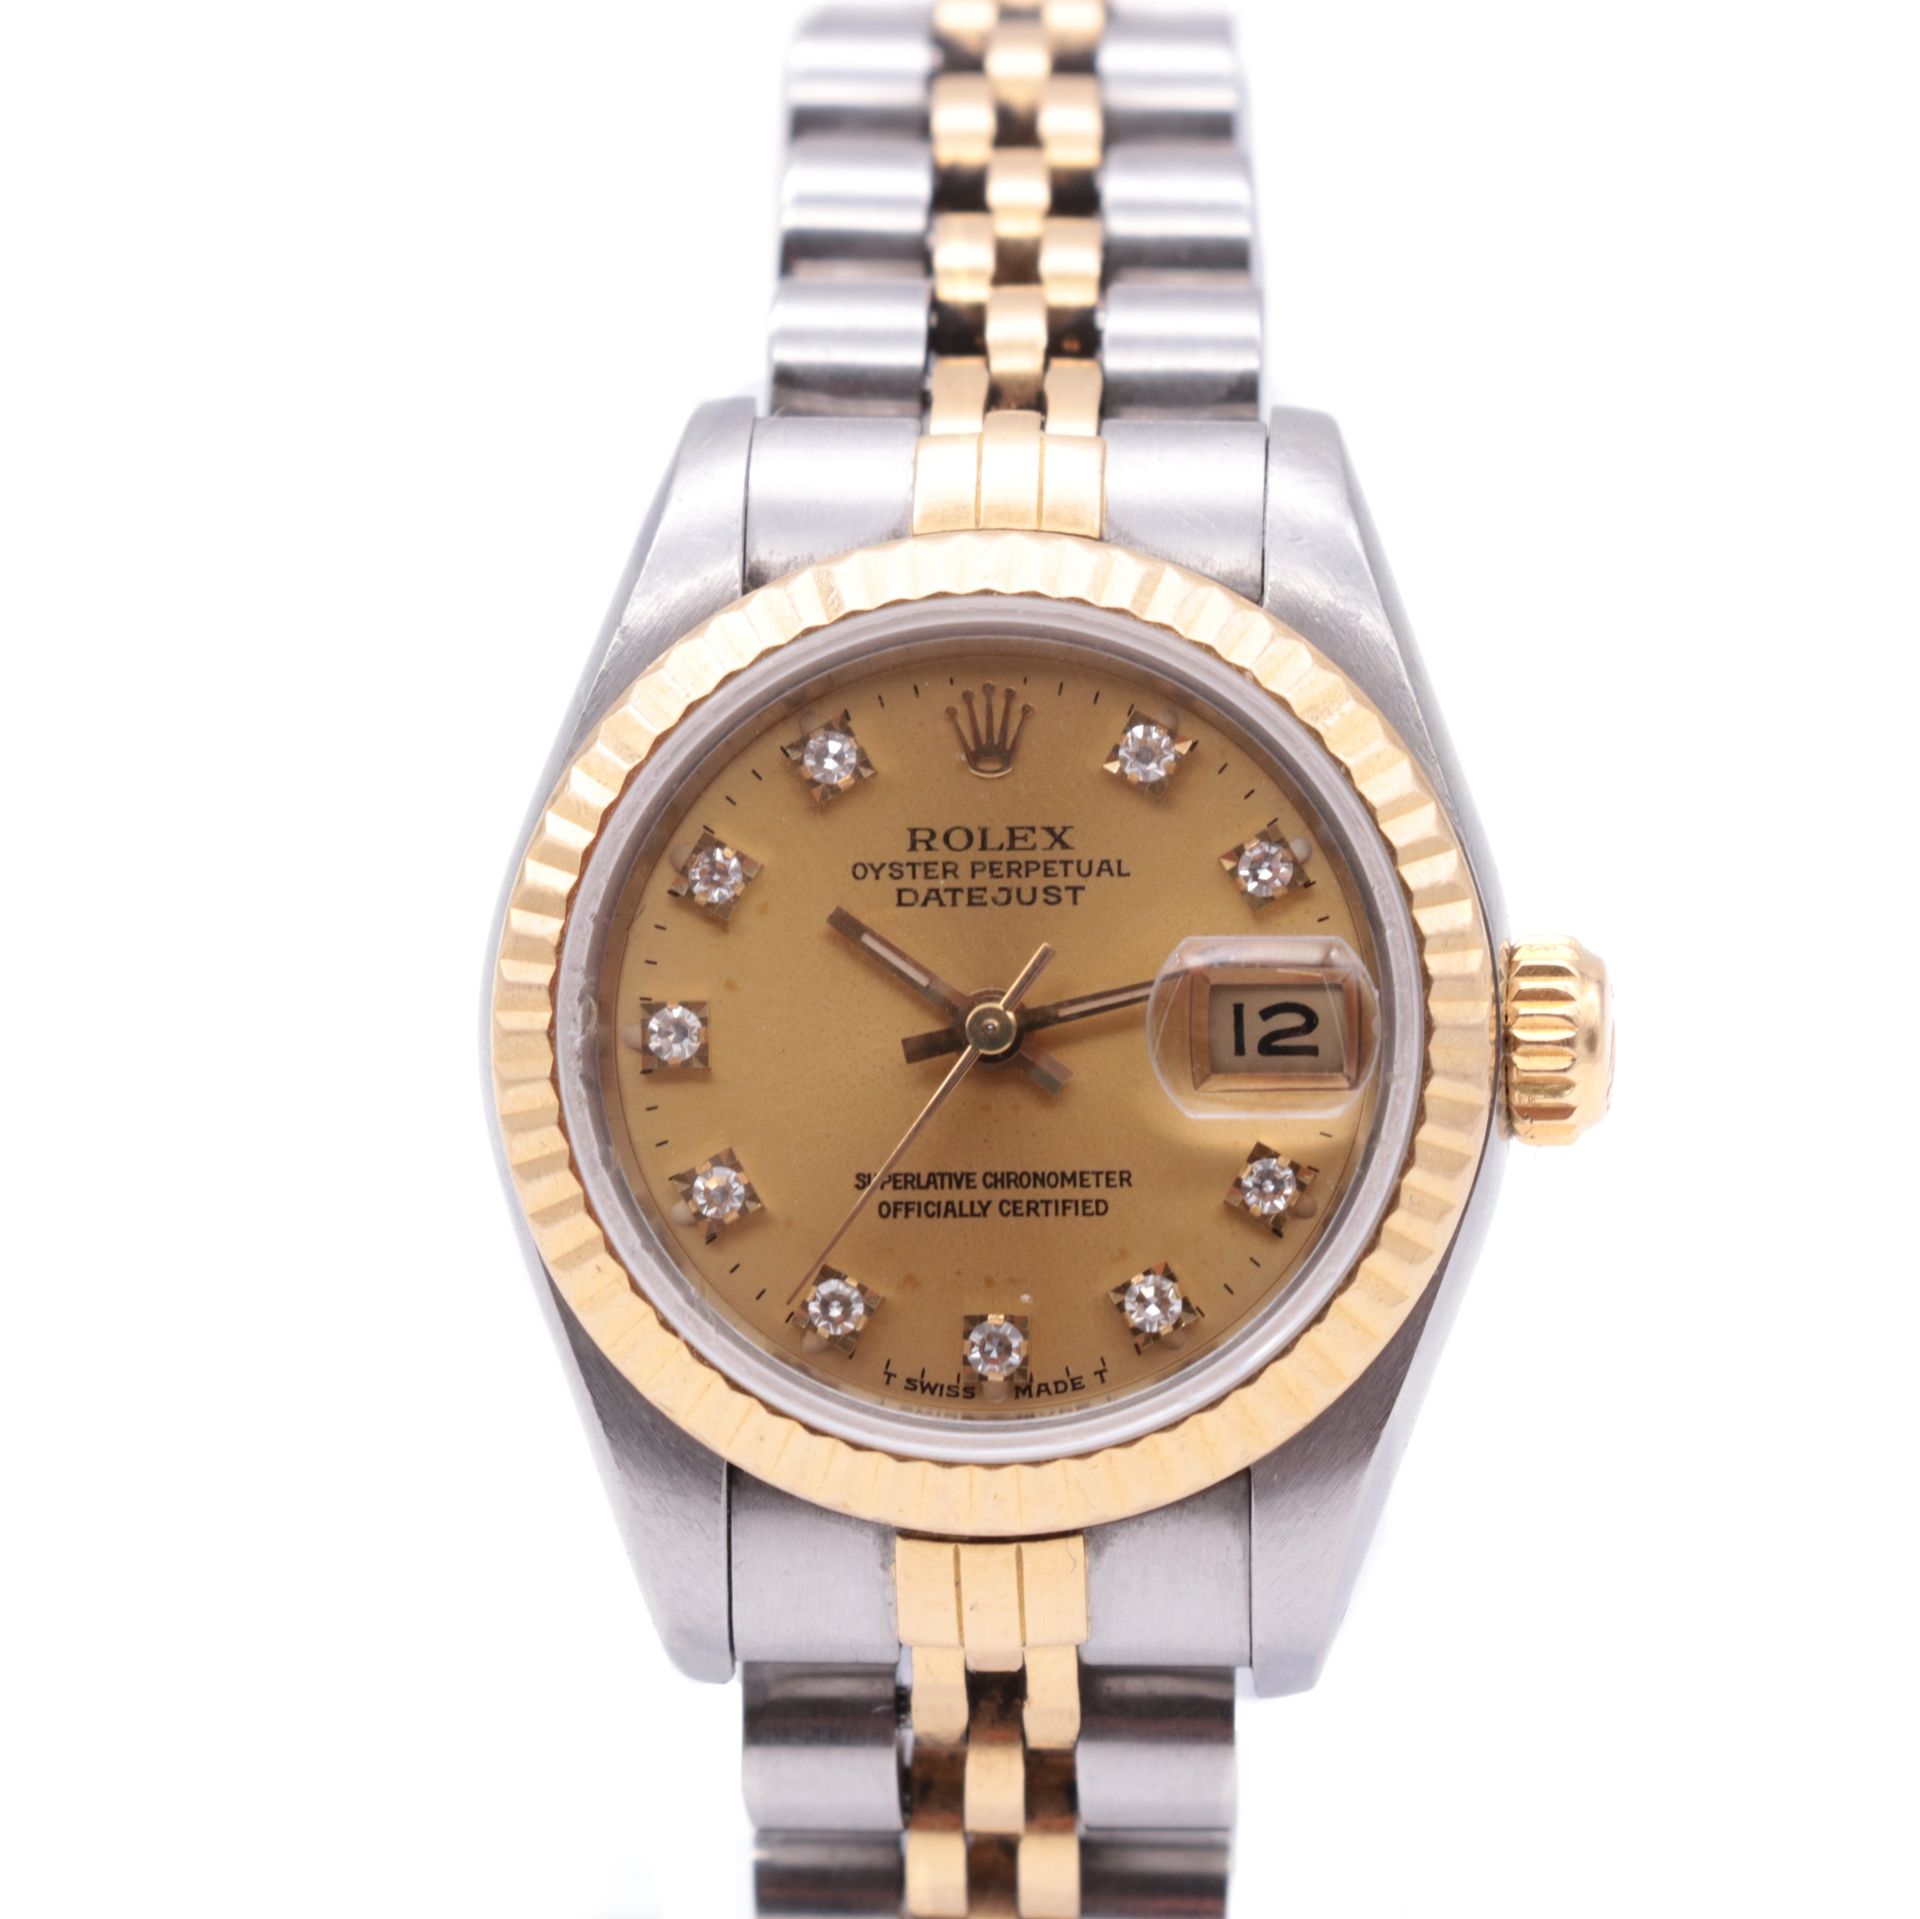 Montre Rolex, Oyster Perpetual Datejust The steel case

The circular gold dial w&hellip;